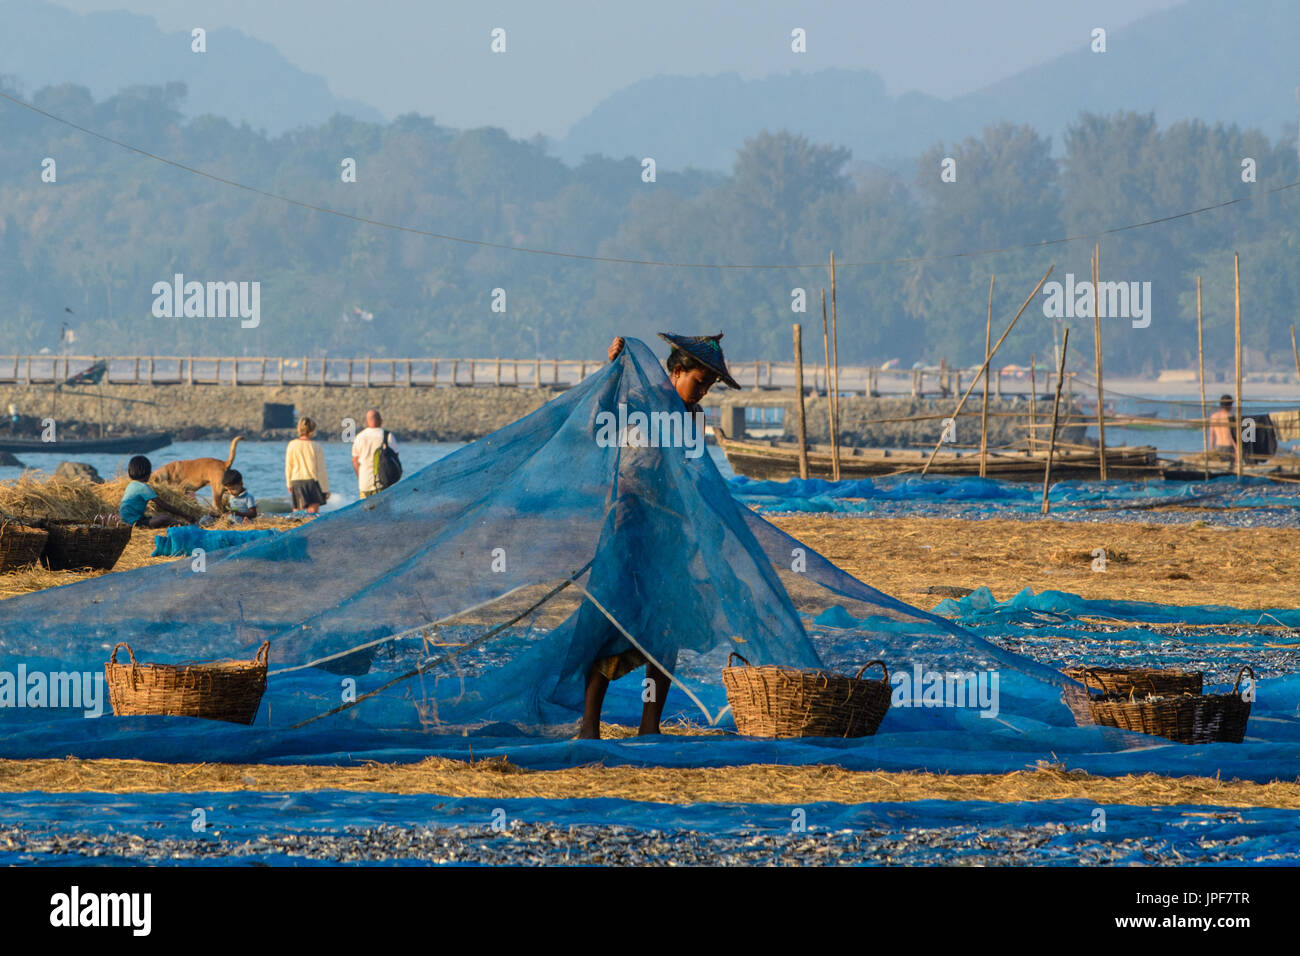 NGAPALI, MYANMAR - FEB 27, 2014: Burmese women at work, drying fresh fish on Ngapali Beach, Myanmar; Selling fish is the main income for the locals of Stock Photo